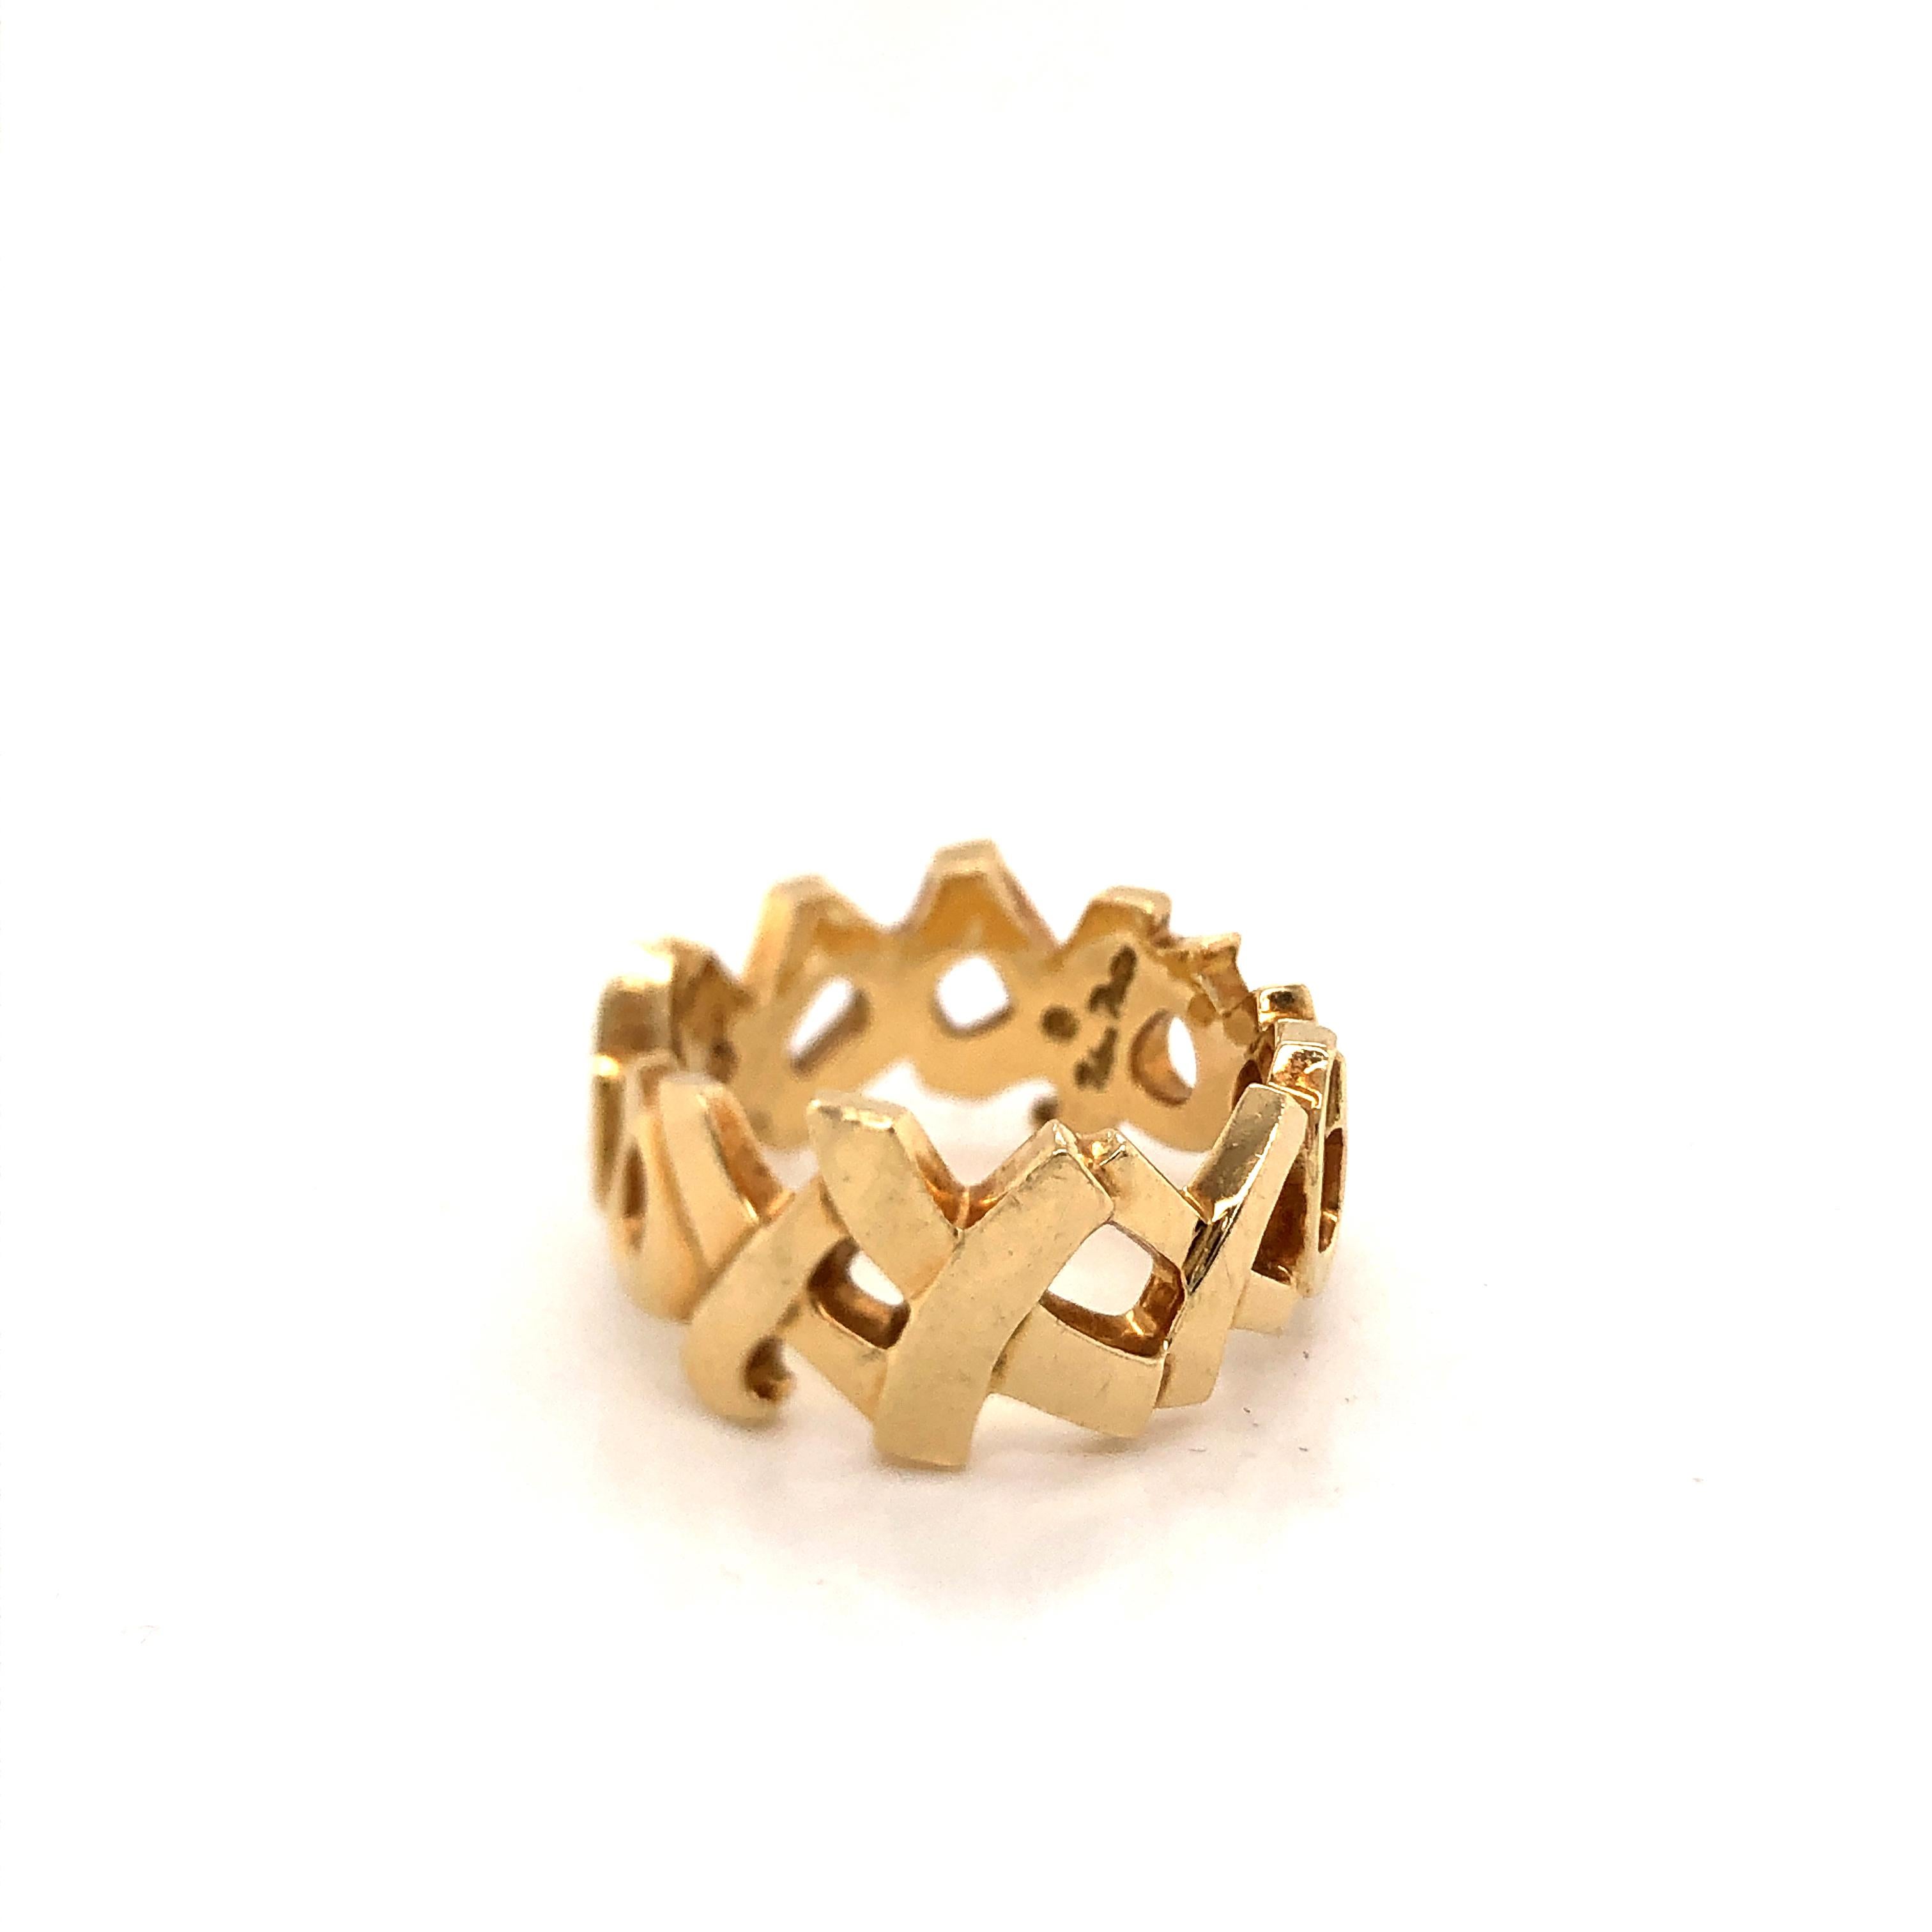 Authentic Tiffany & Co. Paloma Picasso 18K yellow gold XO ring size 7.75. This iconic ring is a timeless classic.  Excellent condition, crafted in 1984 fully hallmarked by designer. Ring weighs 11.12 grams.